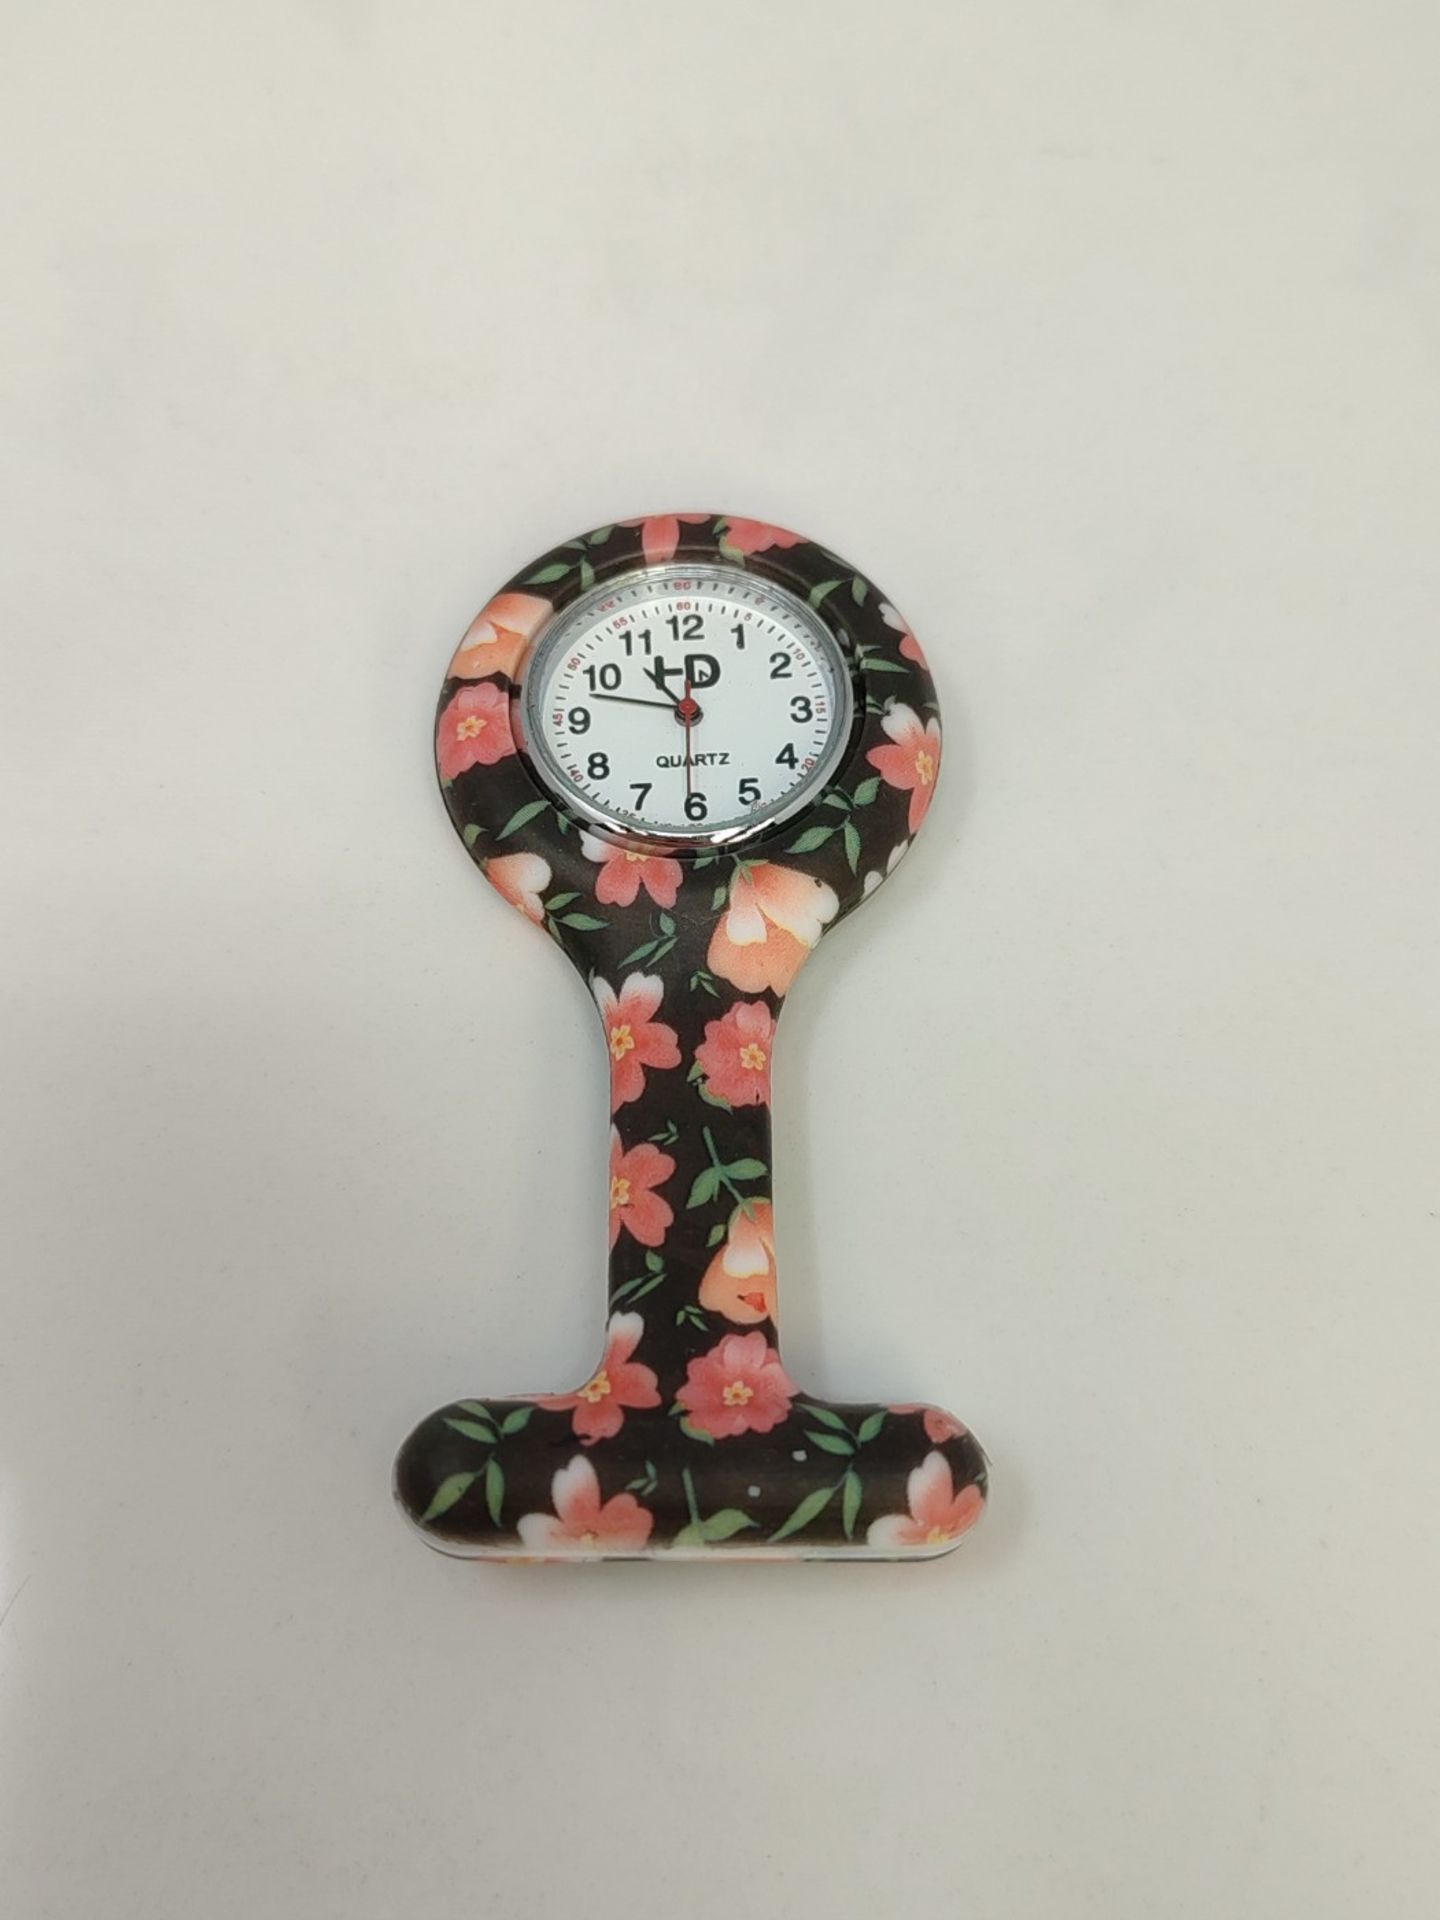 Boolavard® TM Sisters Watch Brooch Watch for Lab Coat, colorful, multicolored - Image 2 of 2